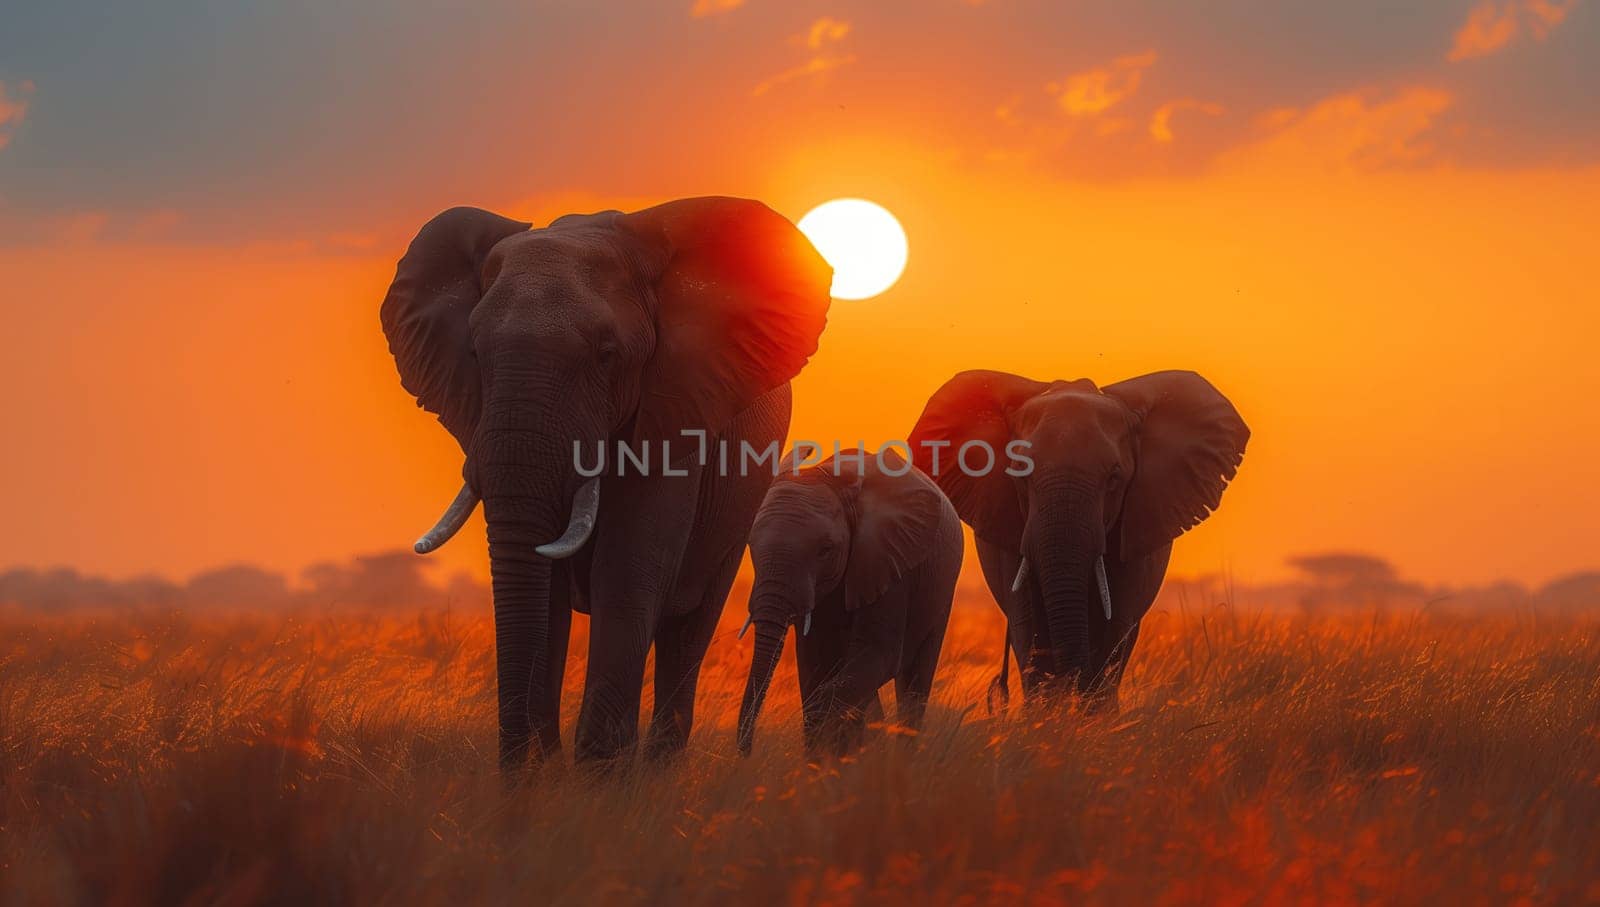 Elephants in a grassy field under a red sky at sunset by richwolf